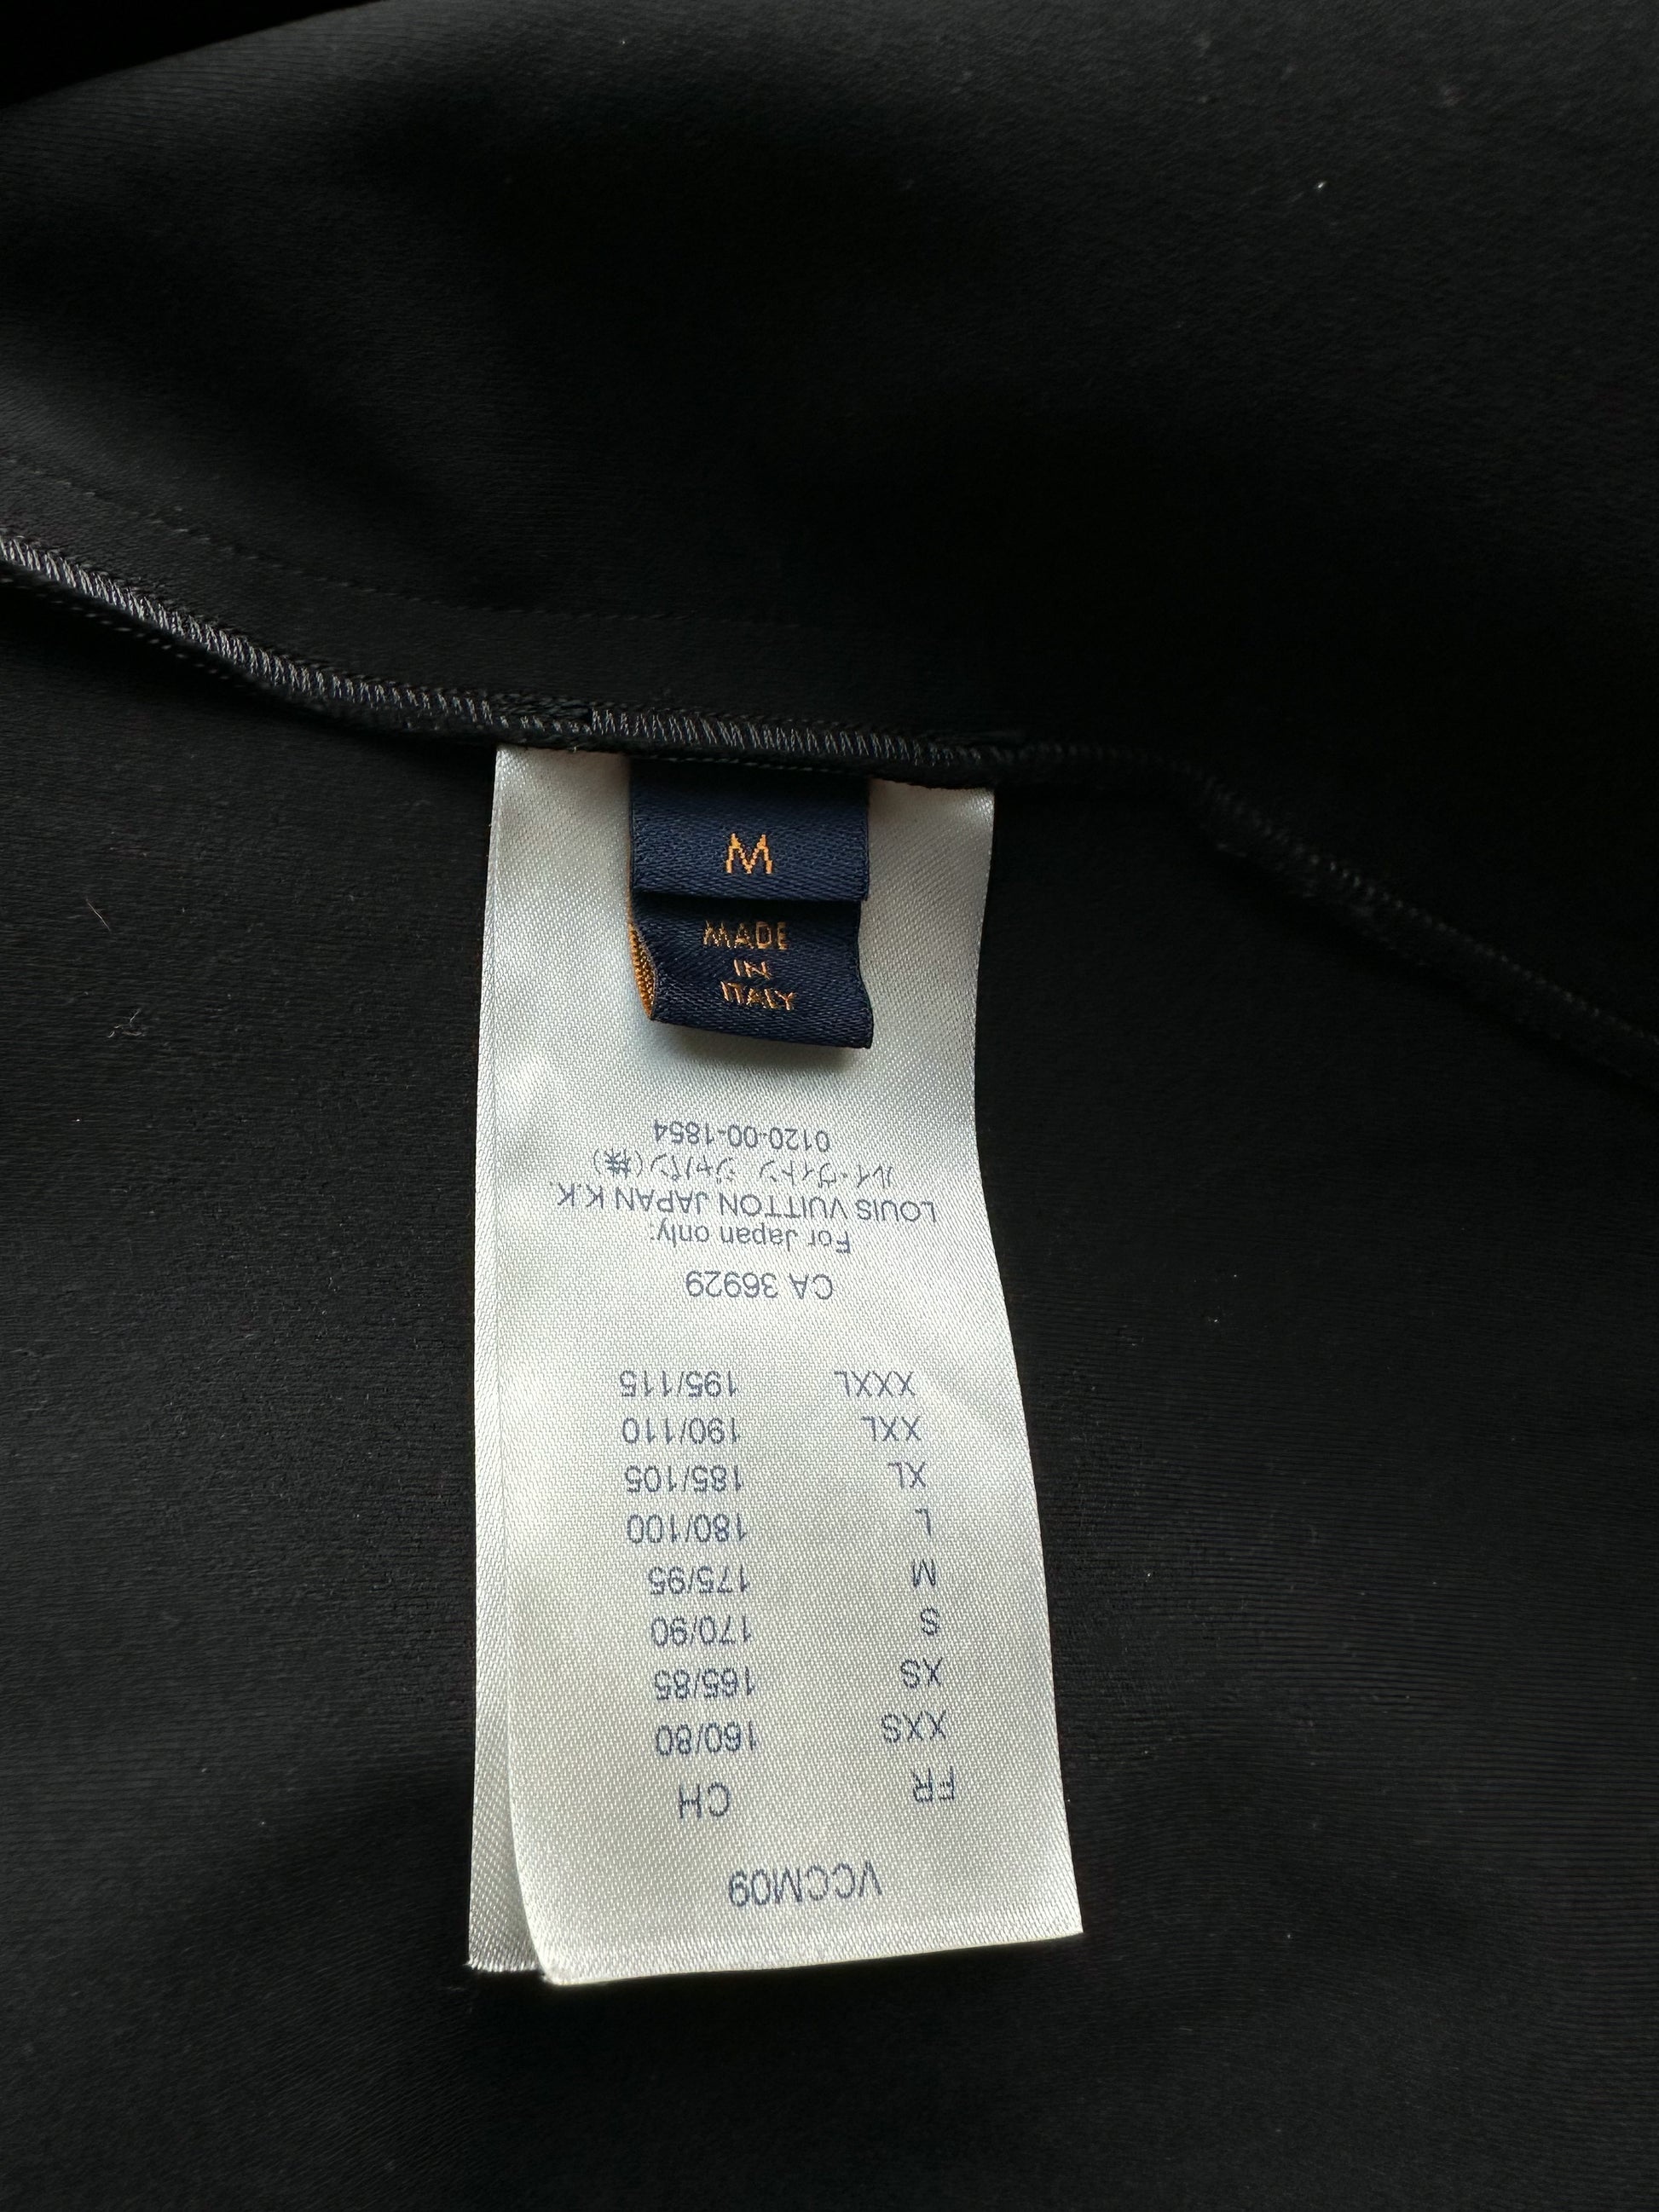 LOUIS VUITTON LV2 ZIP UP HOODIE, Brand new with tags.